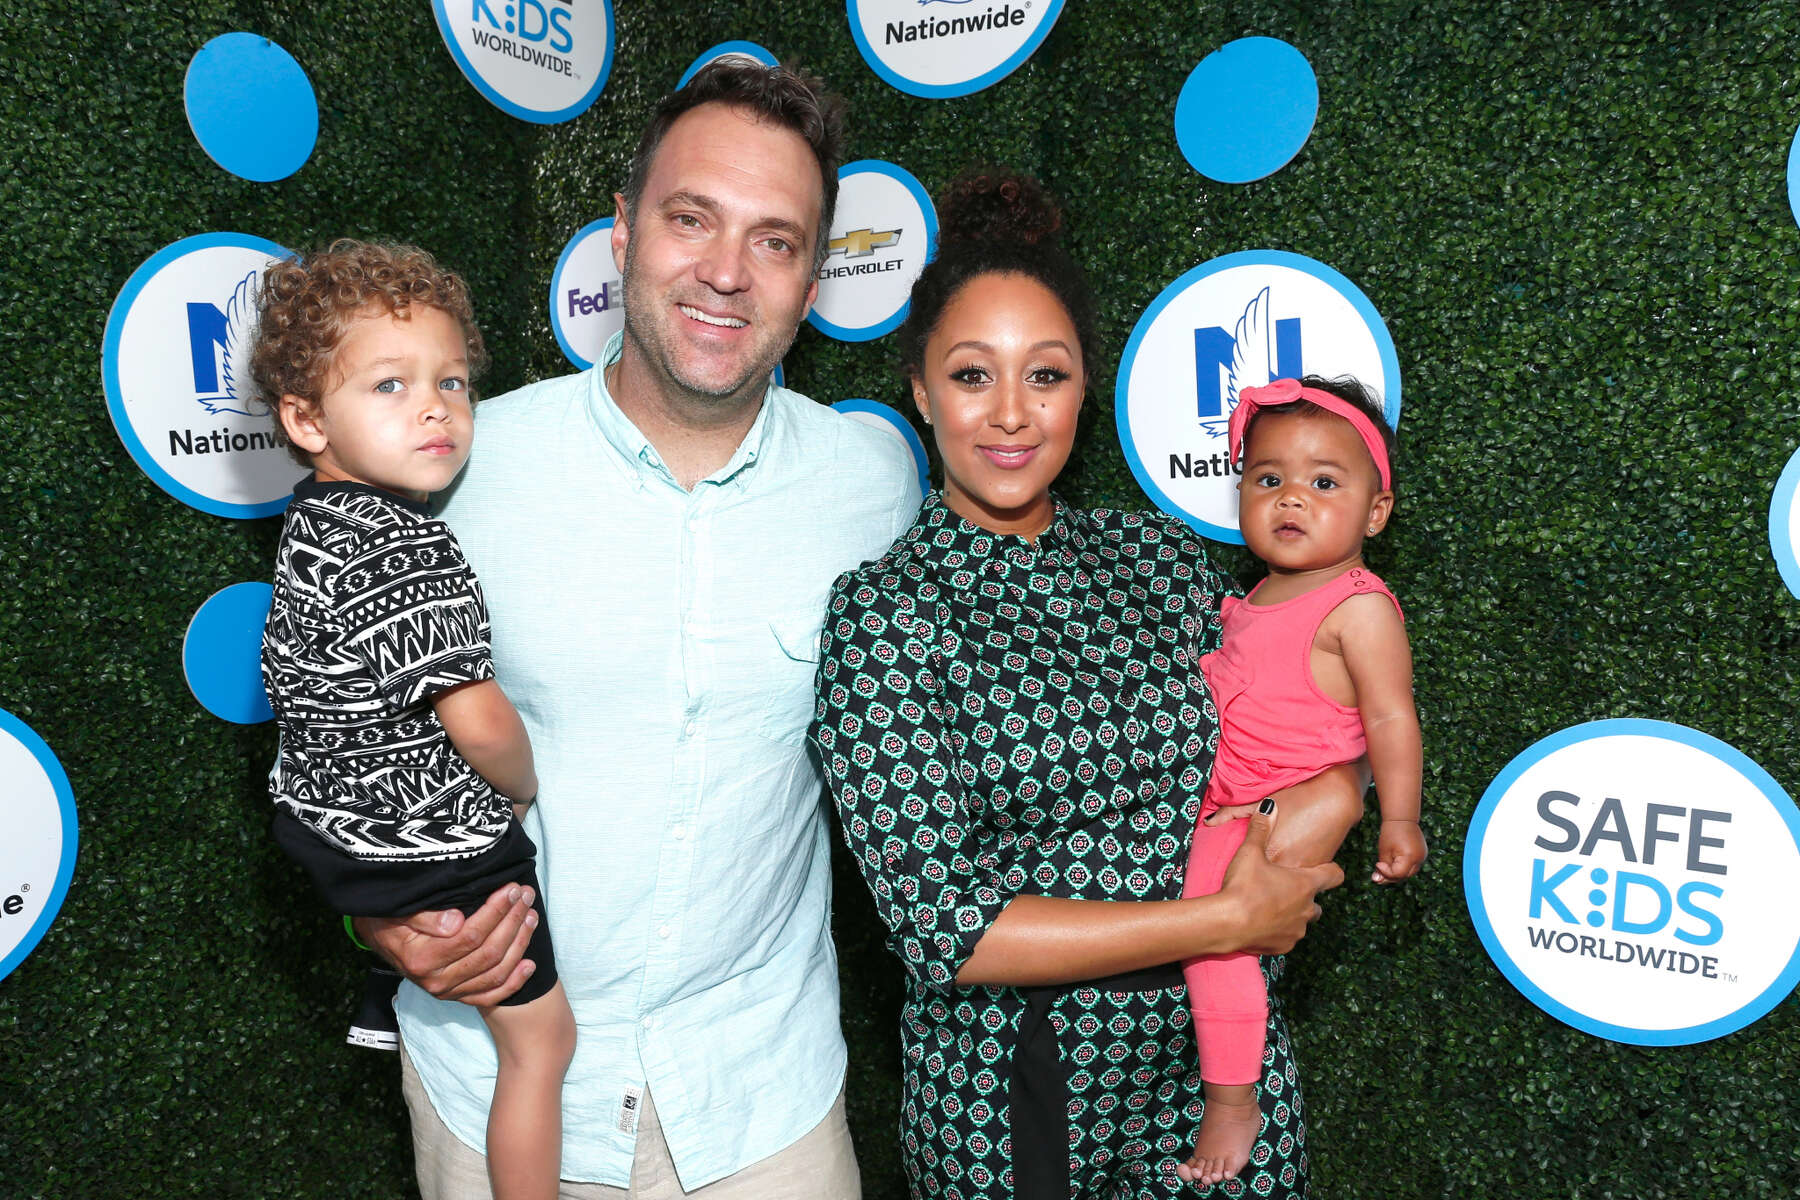 Tamera Mowry's new home renovation show sees star's family fixing up Napa  house